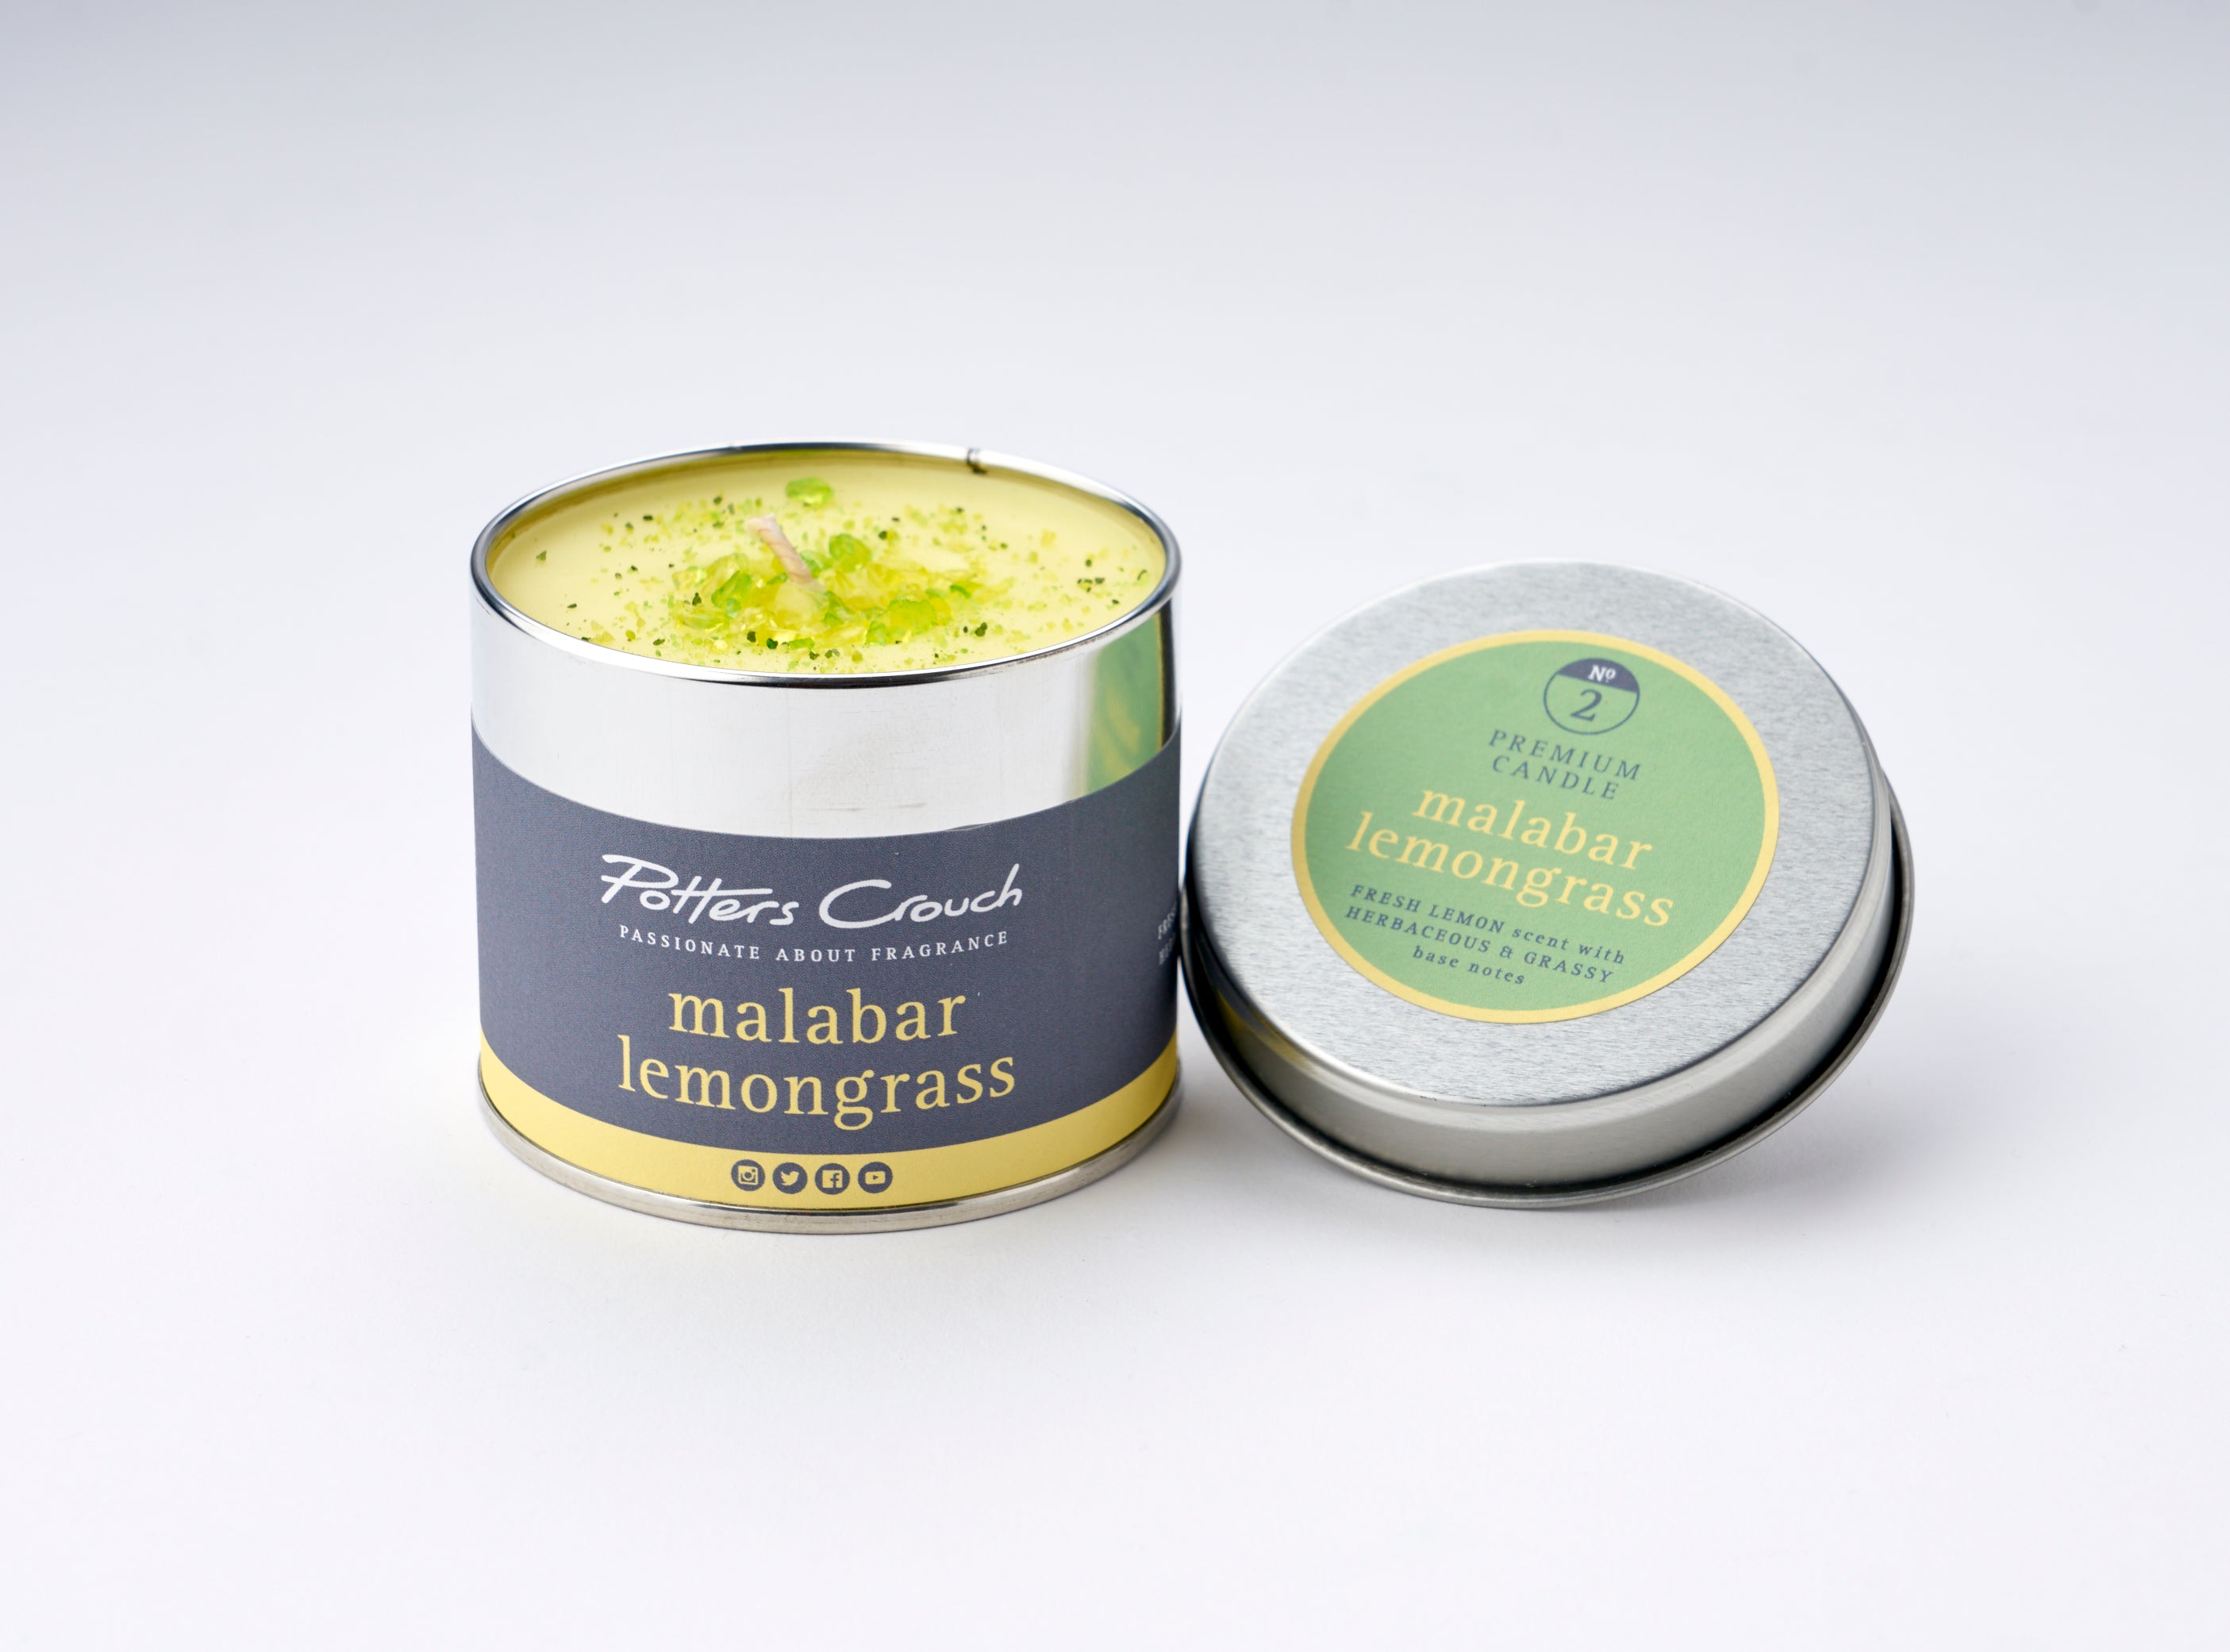 Malabar Lemongrass - Scented Candle in a Tin - Potters Crouch